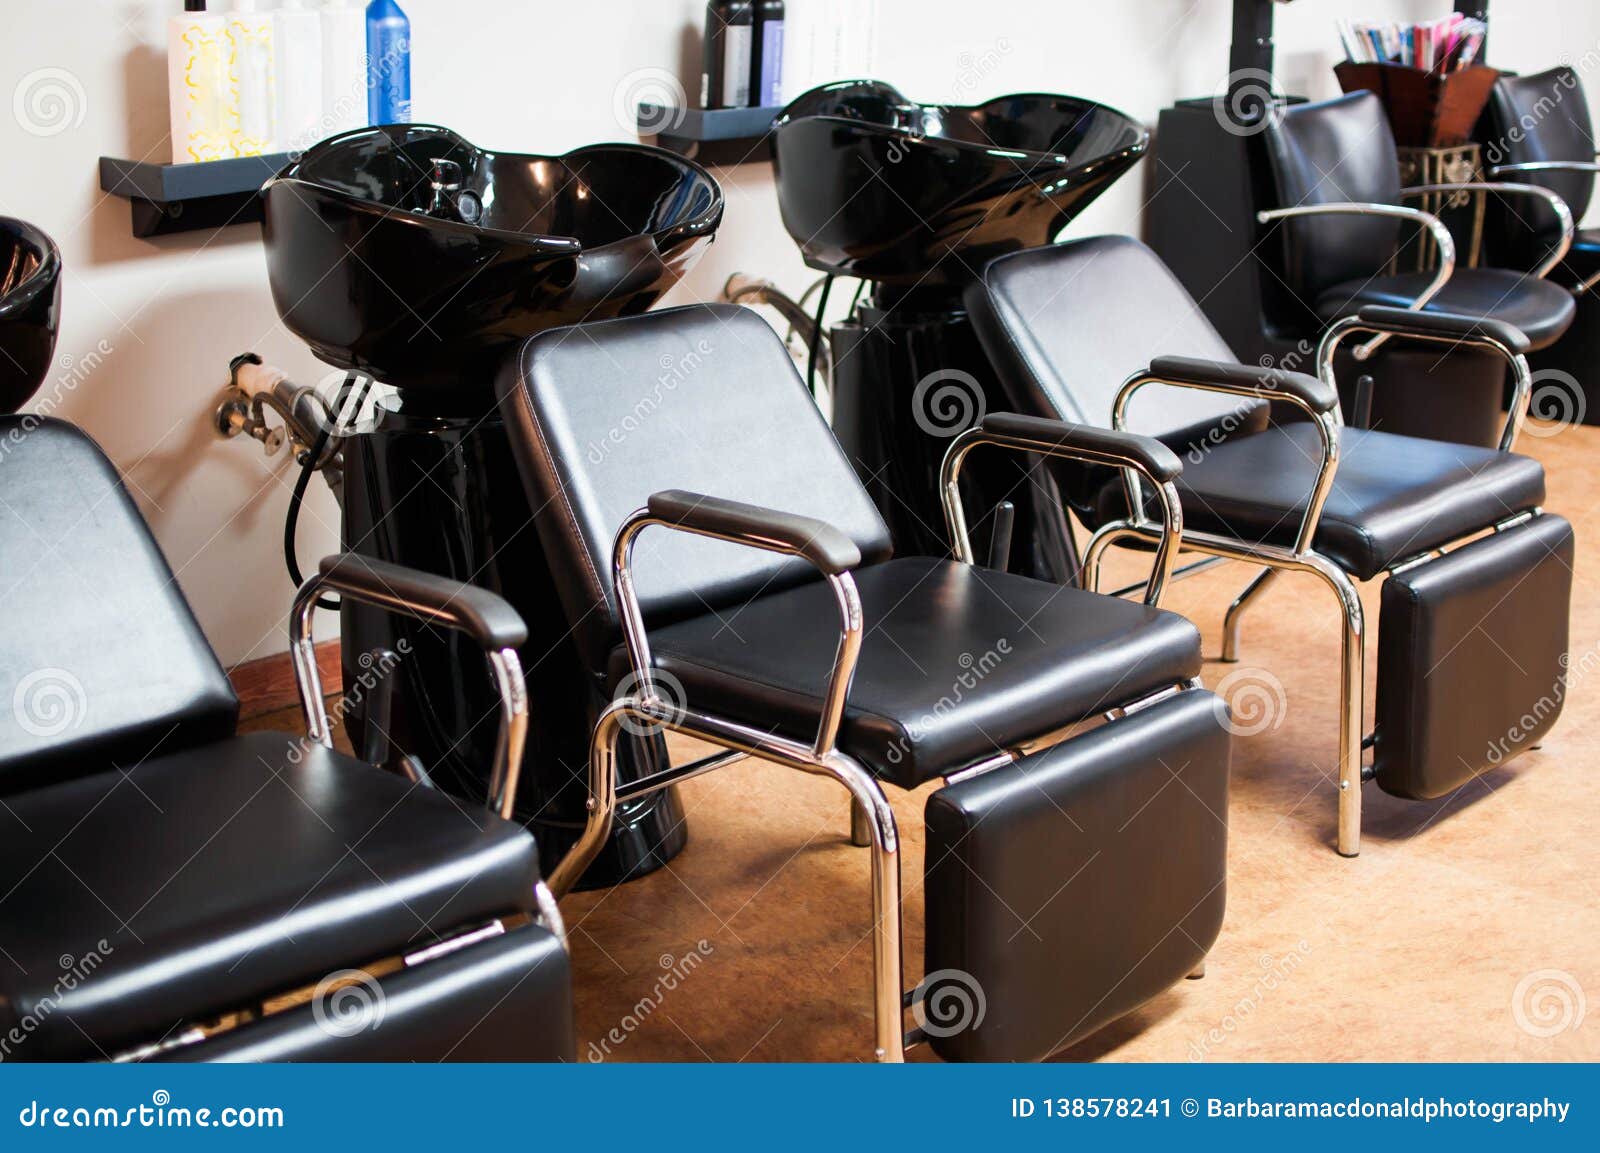 Hair Washing Chair and Sink Stations Inside a Beauty Salon Stock Image -  Image of washing, hair: 138578241